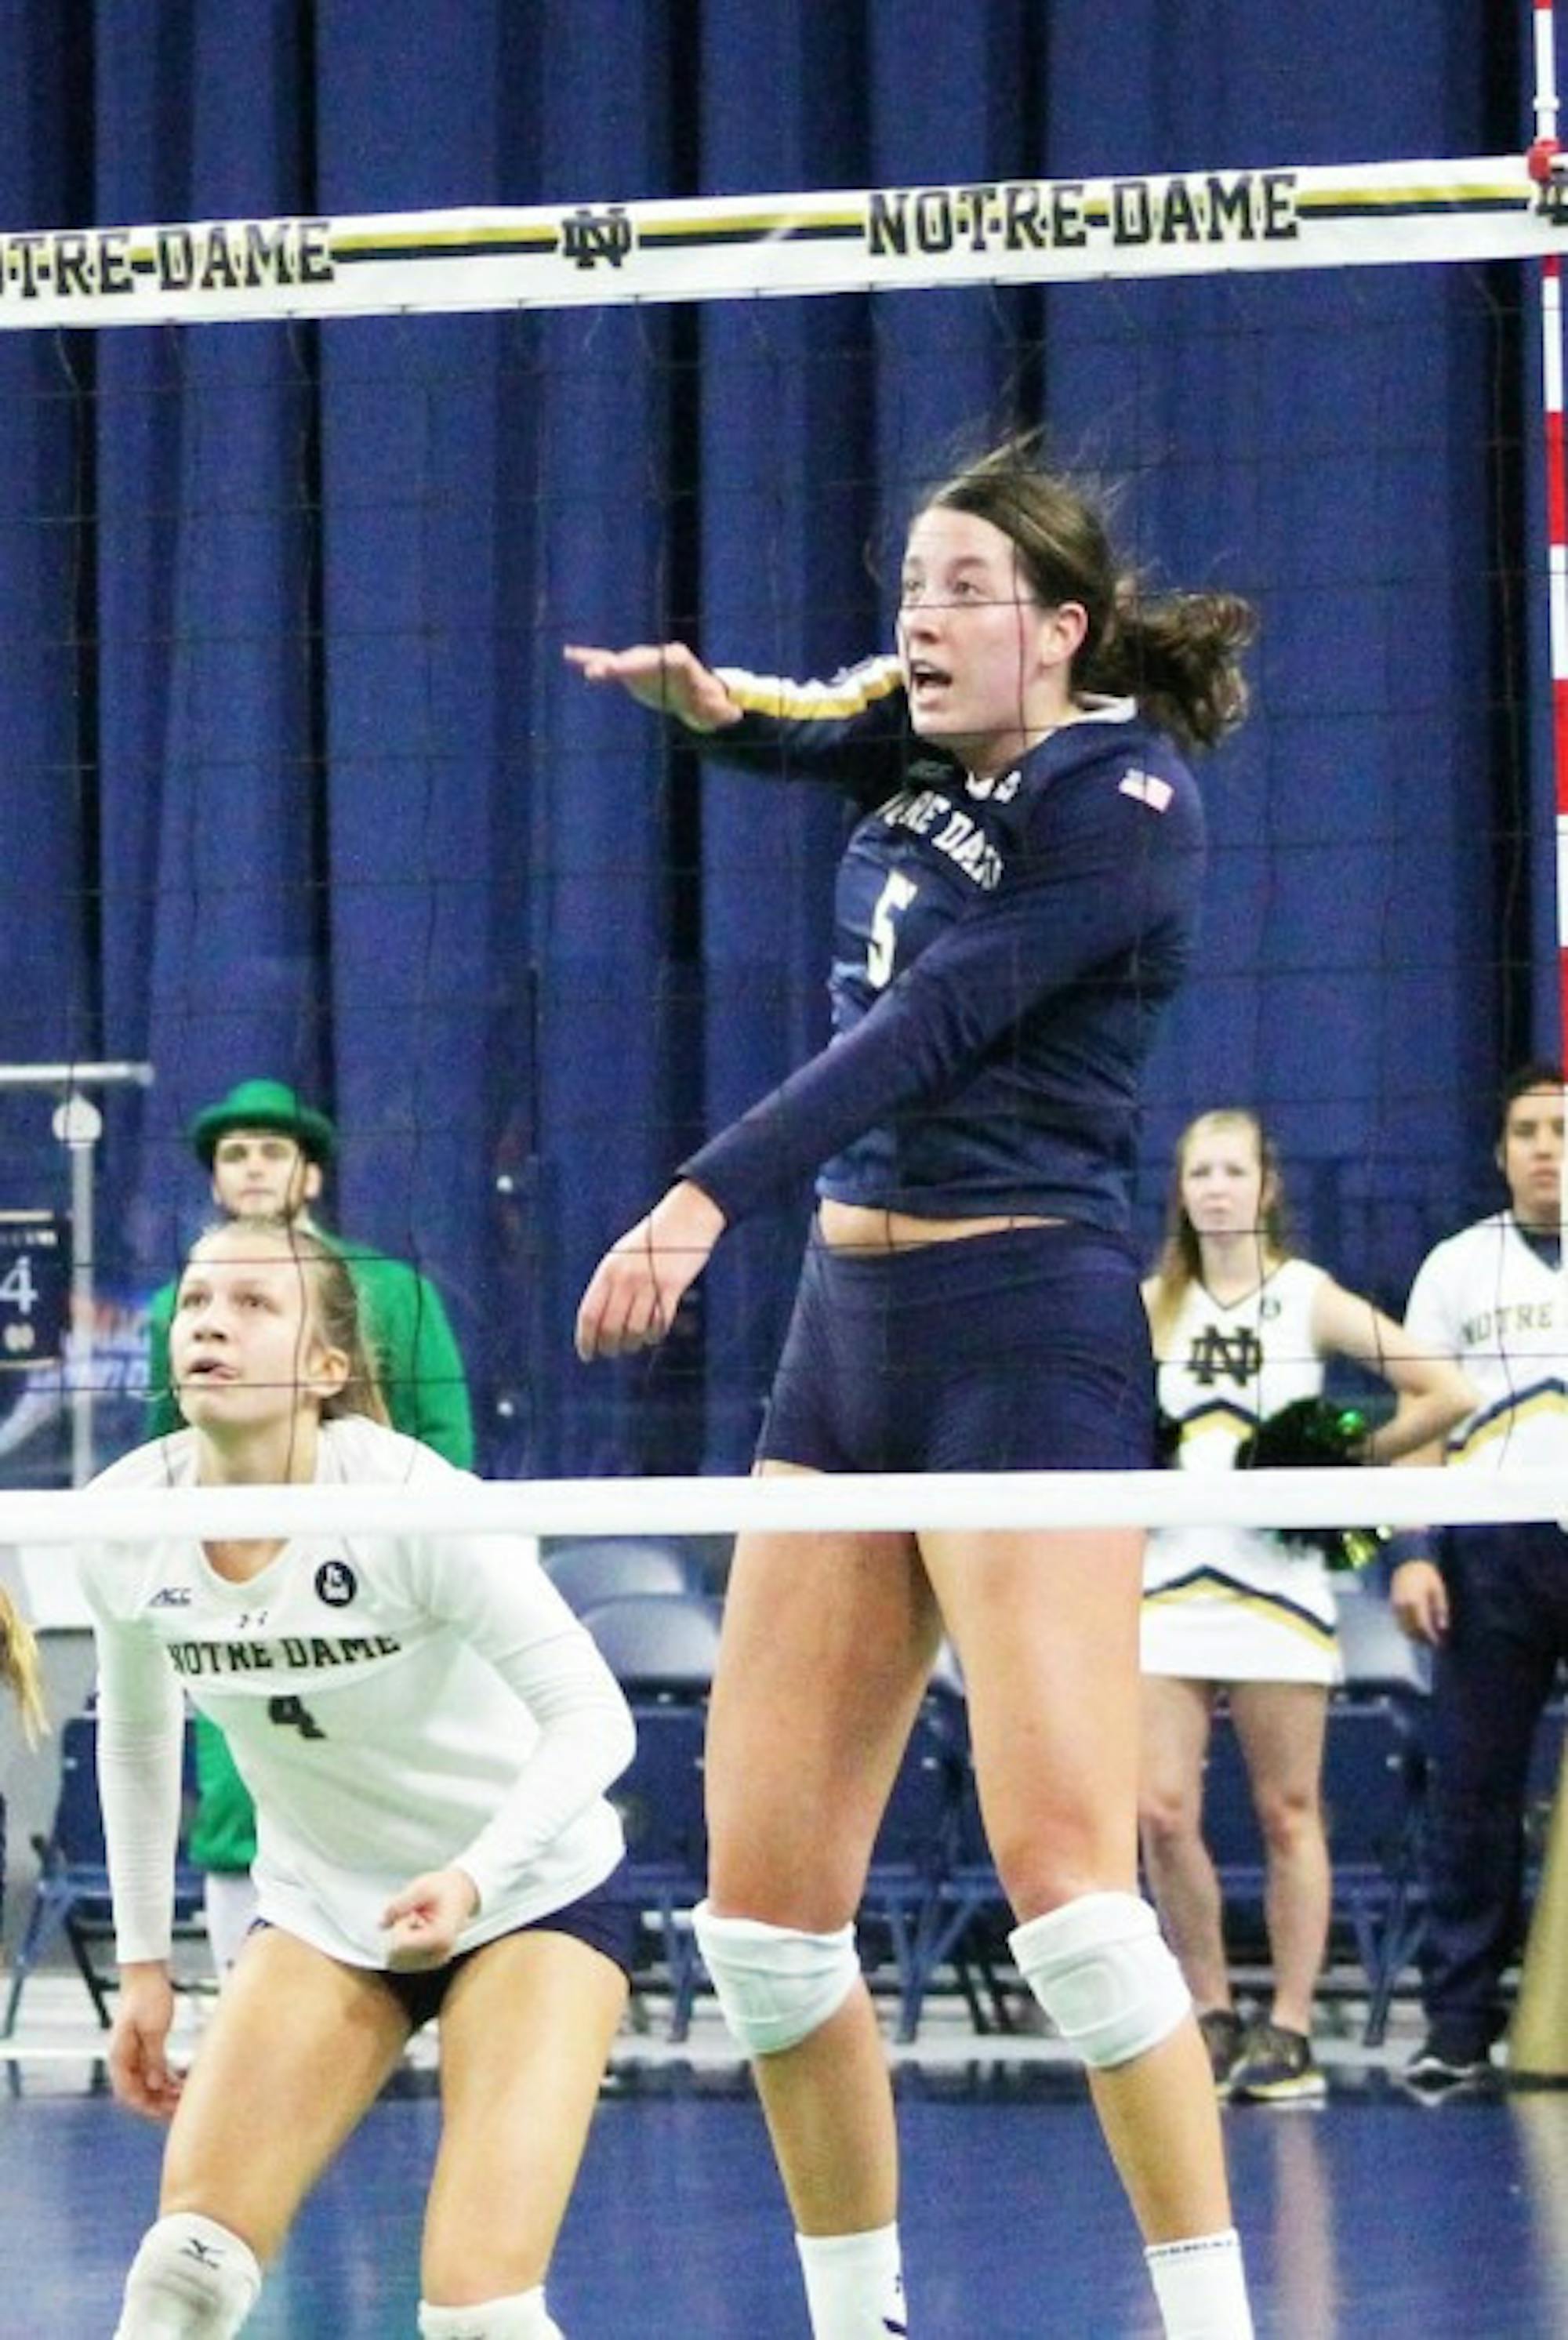 Junior outside hitter Sydney Kuhn makes a hit during Notre Dame’s 3-2 loss to Syracuse at Purcell Pavilion on Oct. 4, 2015.